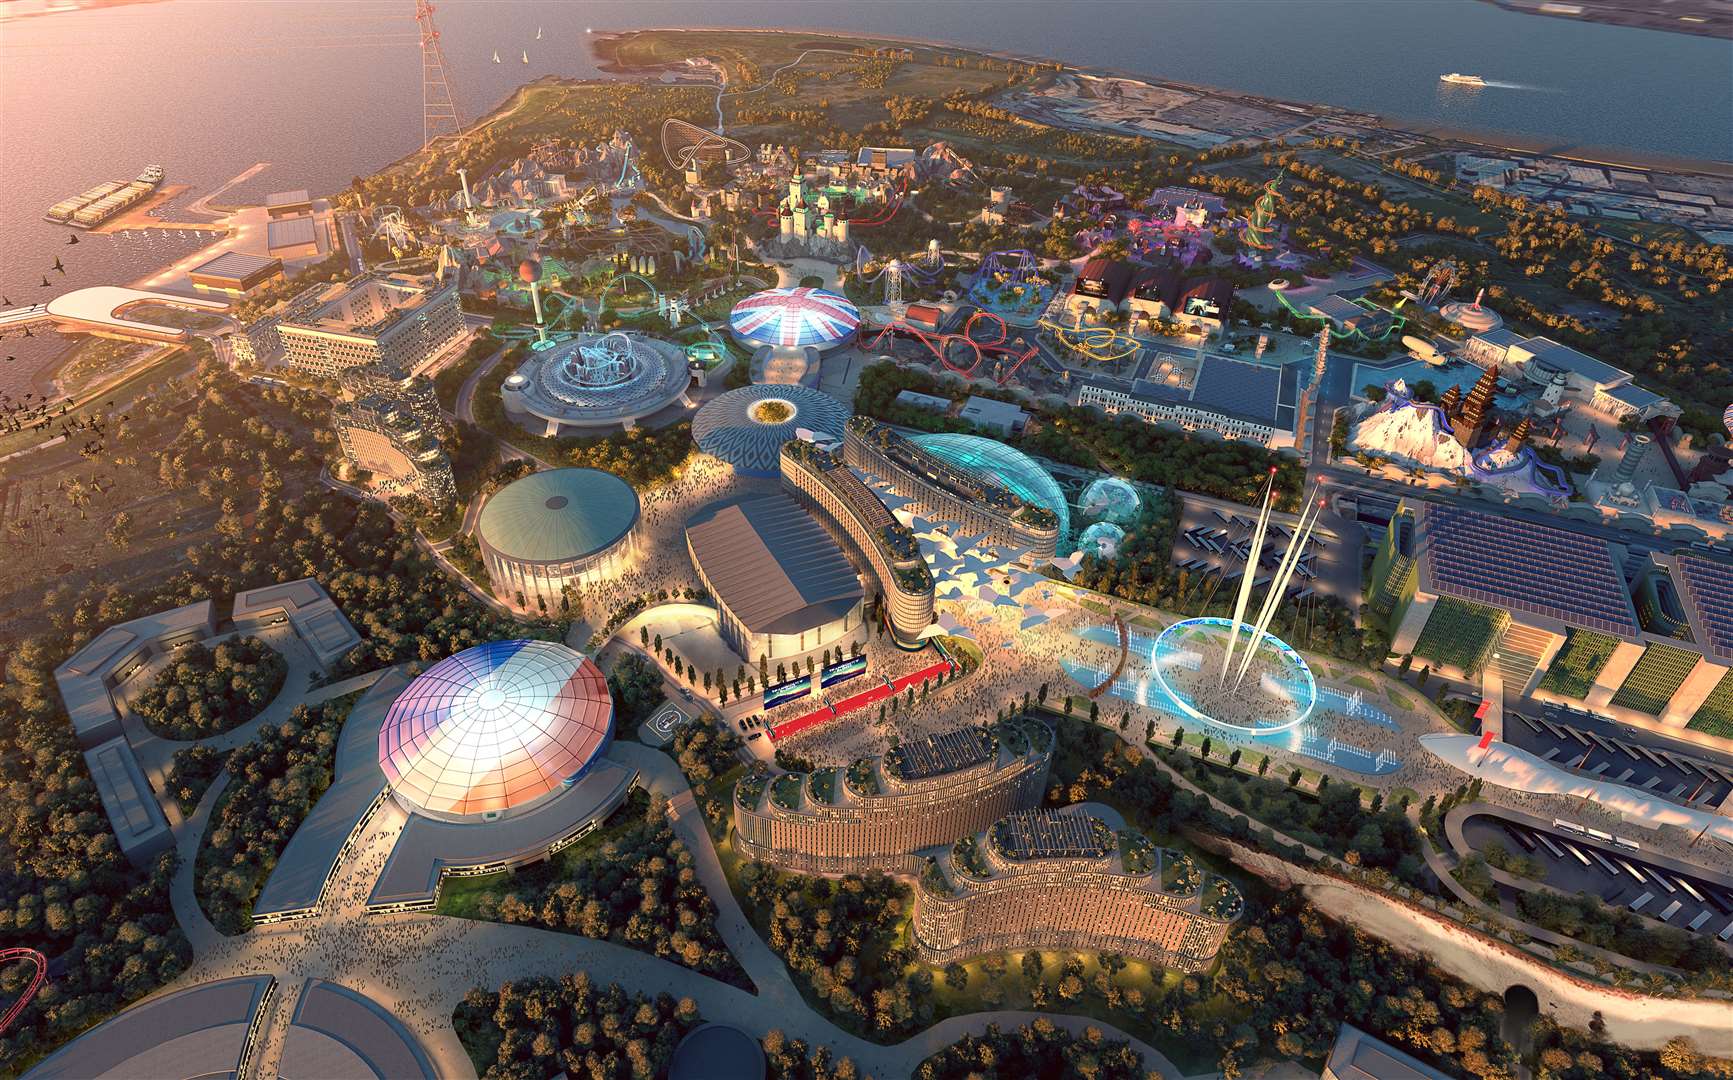 A detailed CGI impression of what the London Resort theme park would look like